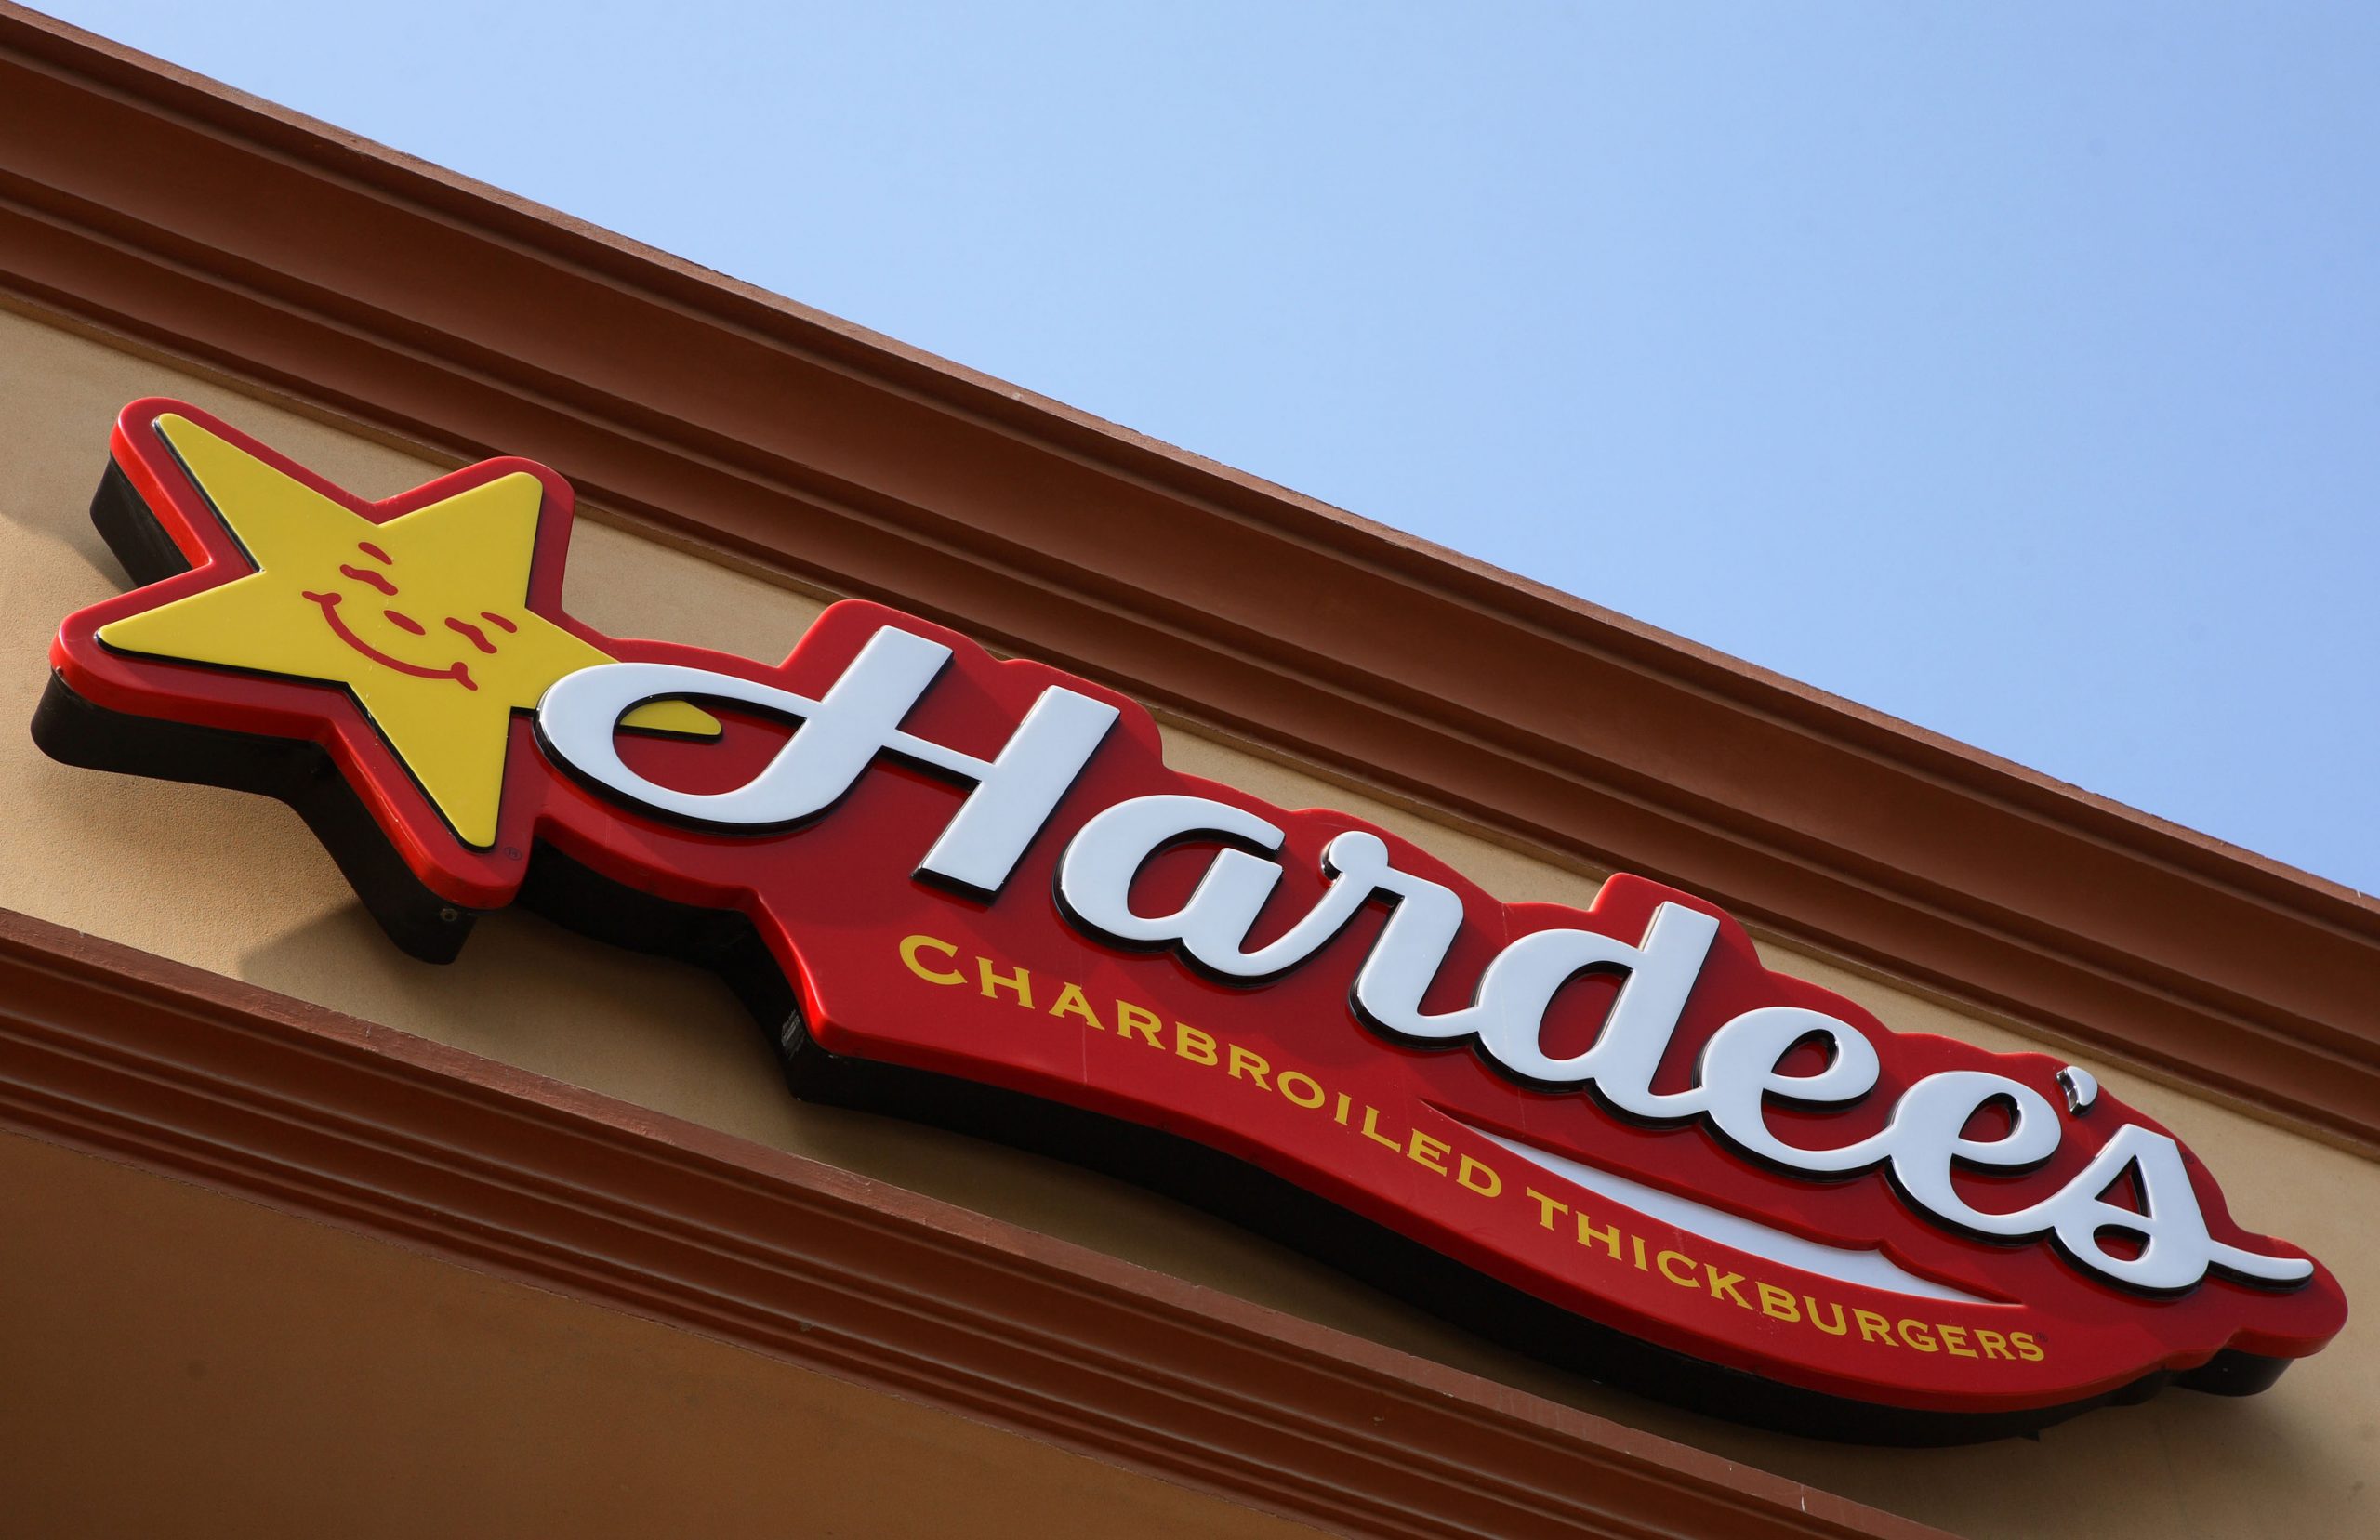 Hardee's in Chalkville, Trussville bite the dust following unexplained closure of 6 central Alabama restaurants